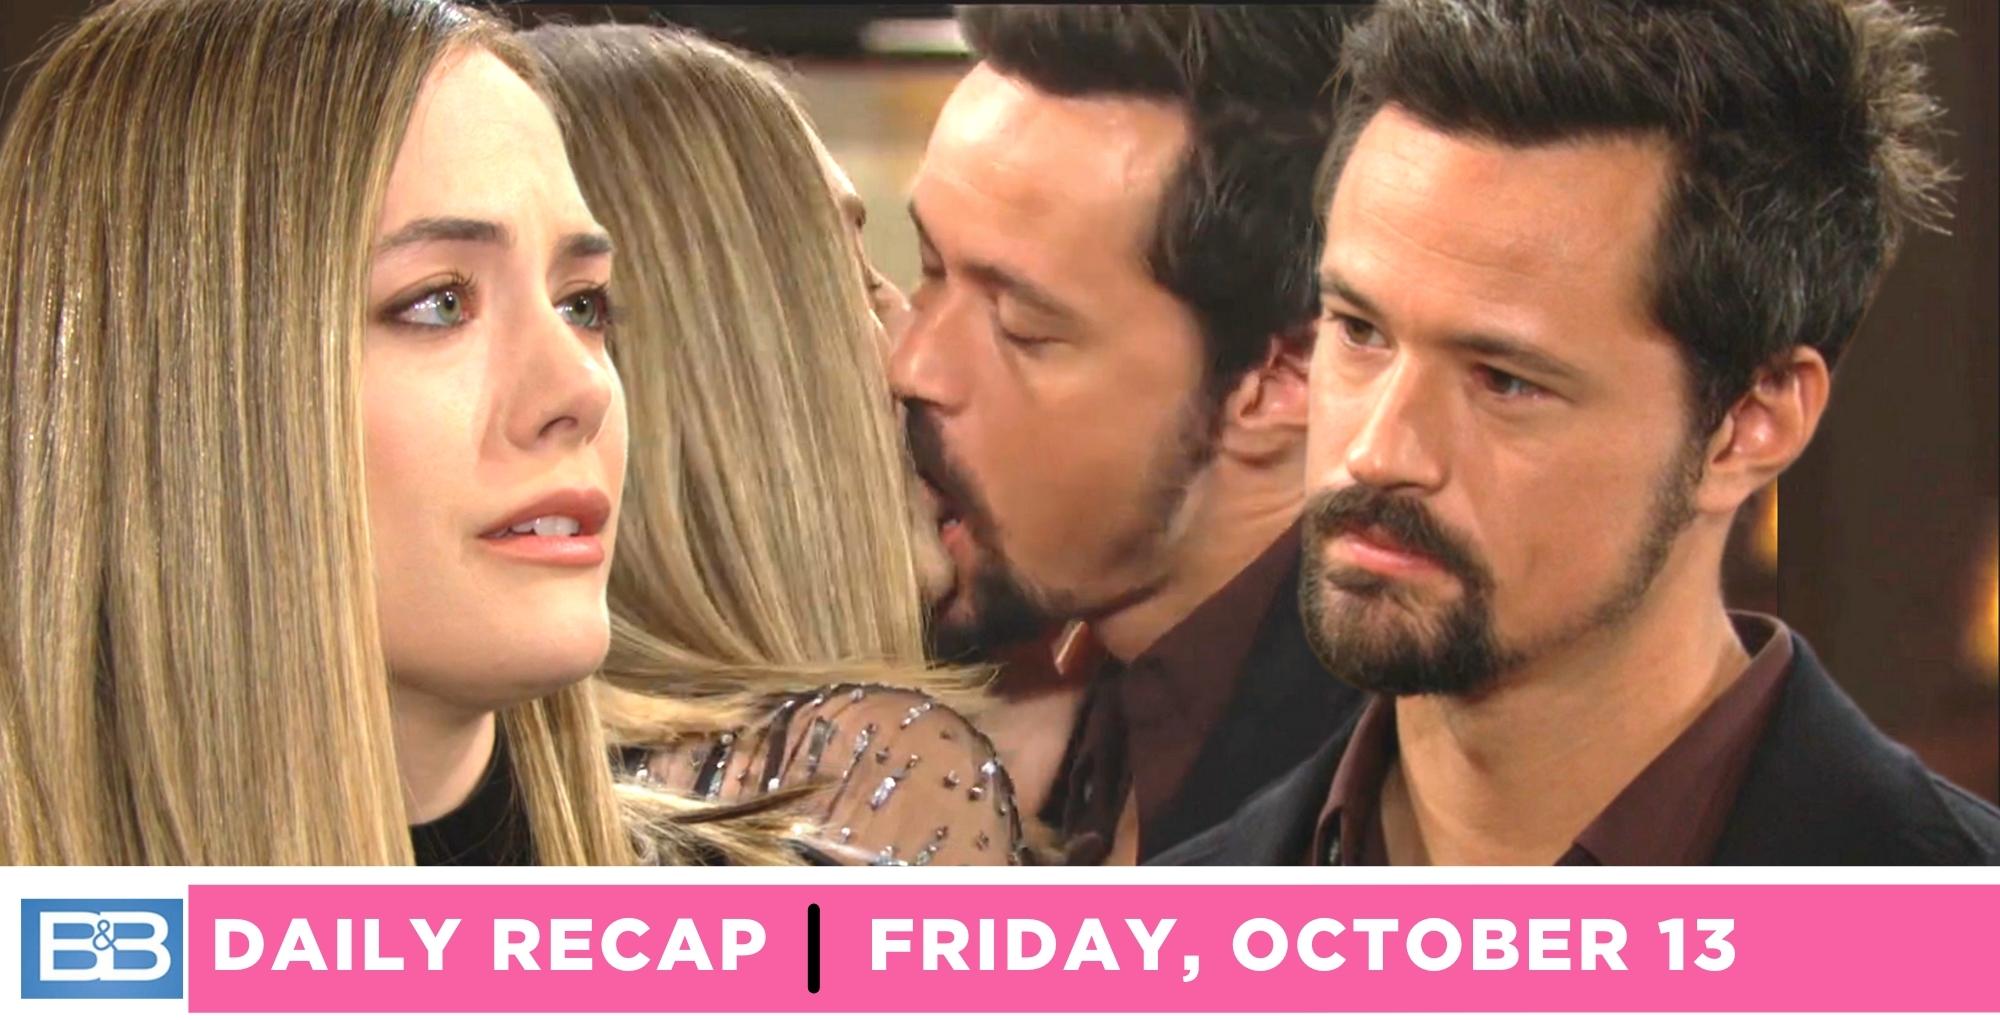 the bold and the beautiful recap for friday, october 13, 2023, main image hope and thomas kissing, insert images of hope and thomas.